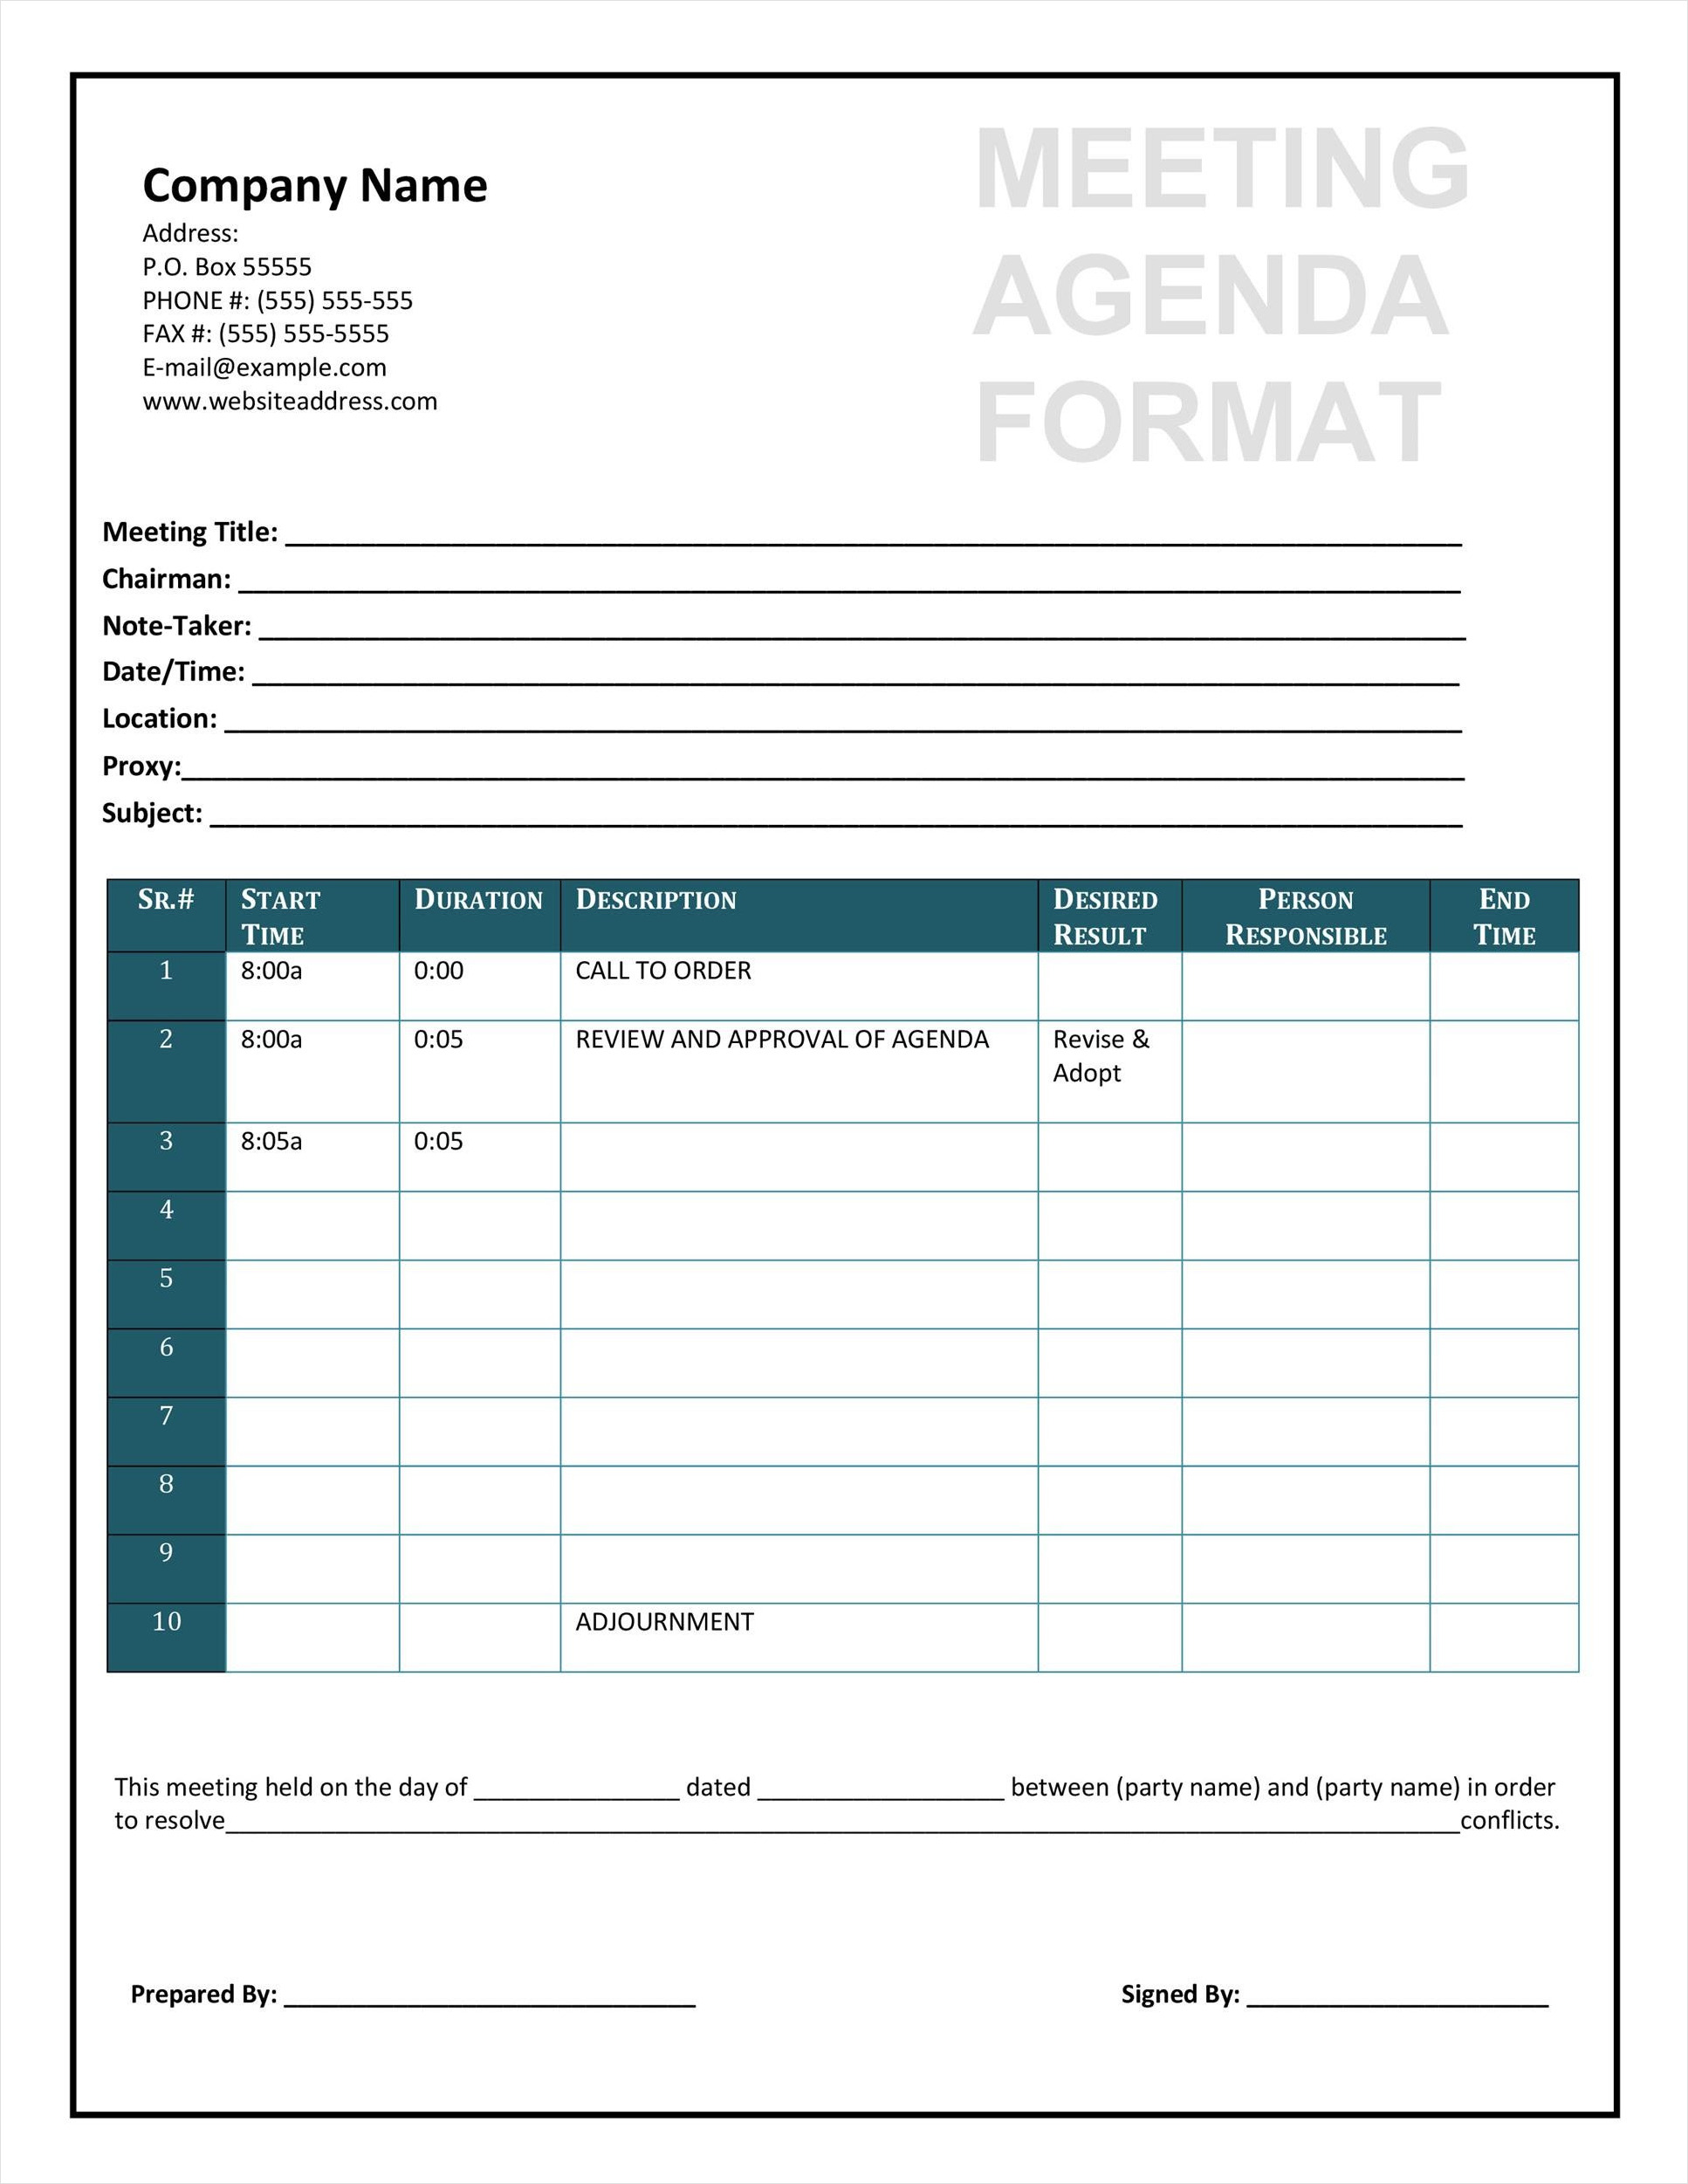 sample of meeting agenda notes template